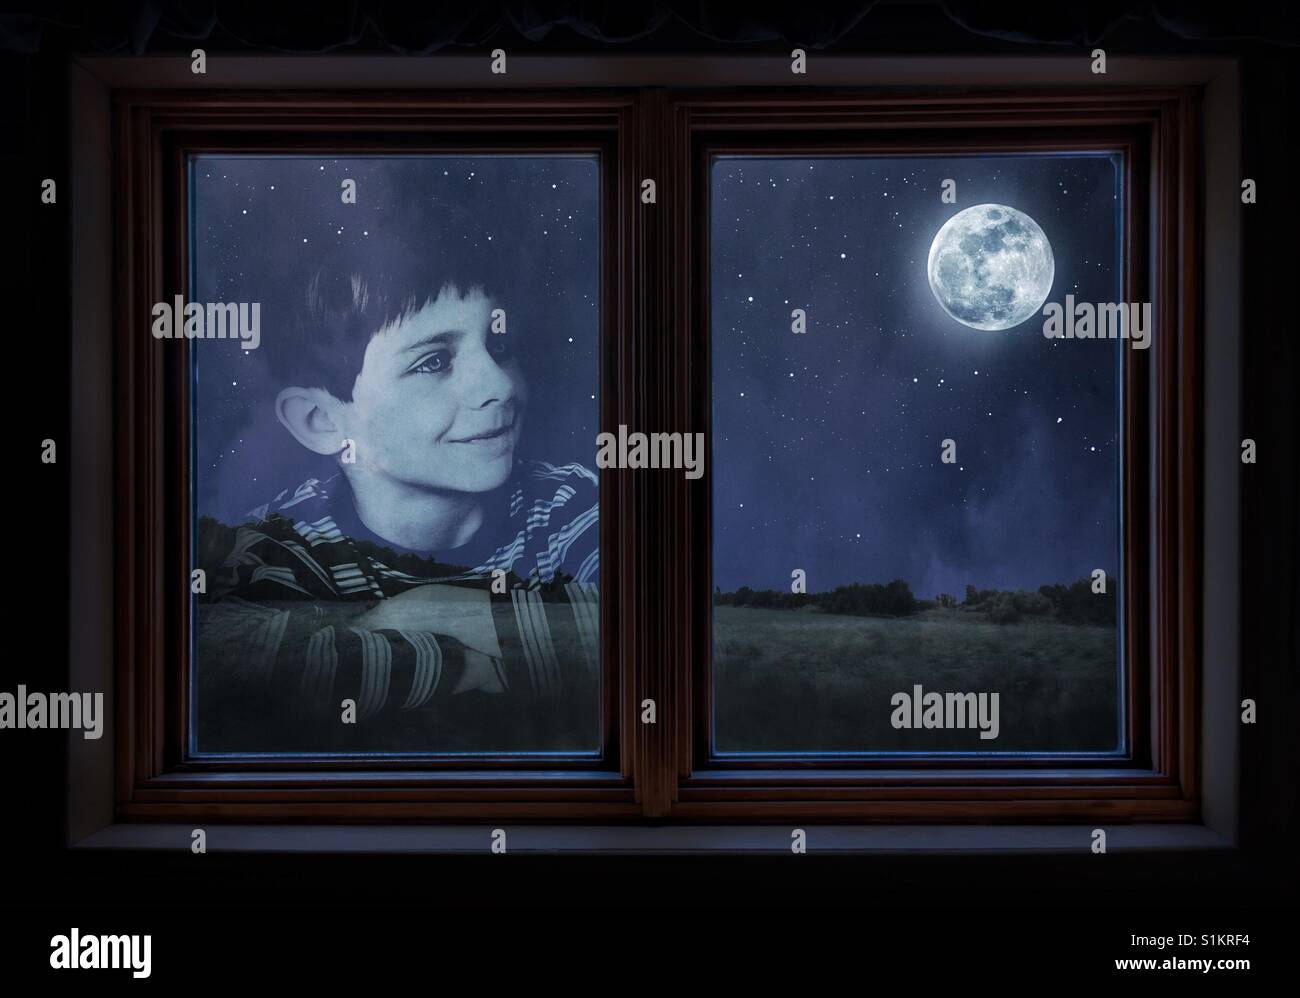 Window reflection of a young boy staring at the moon Stock Photo